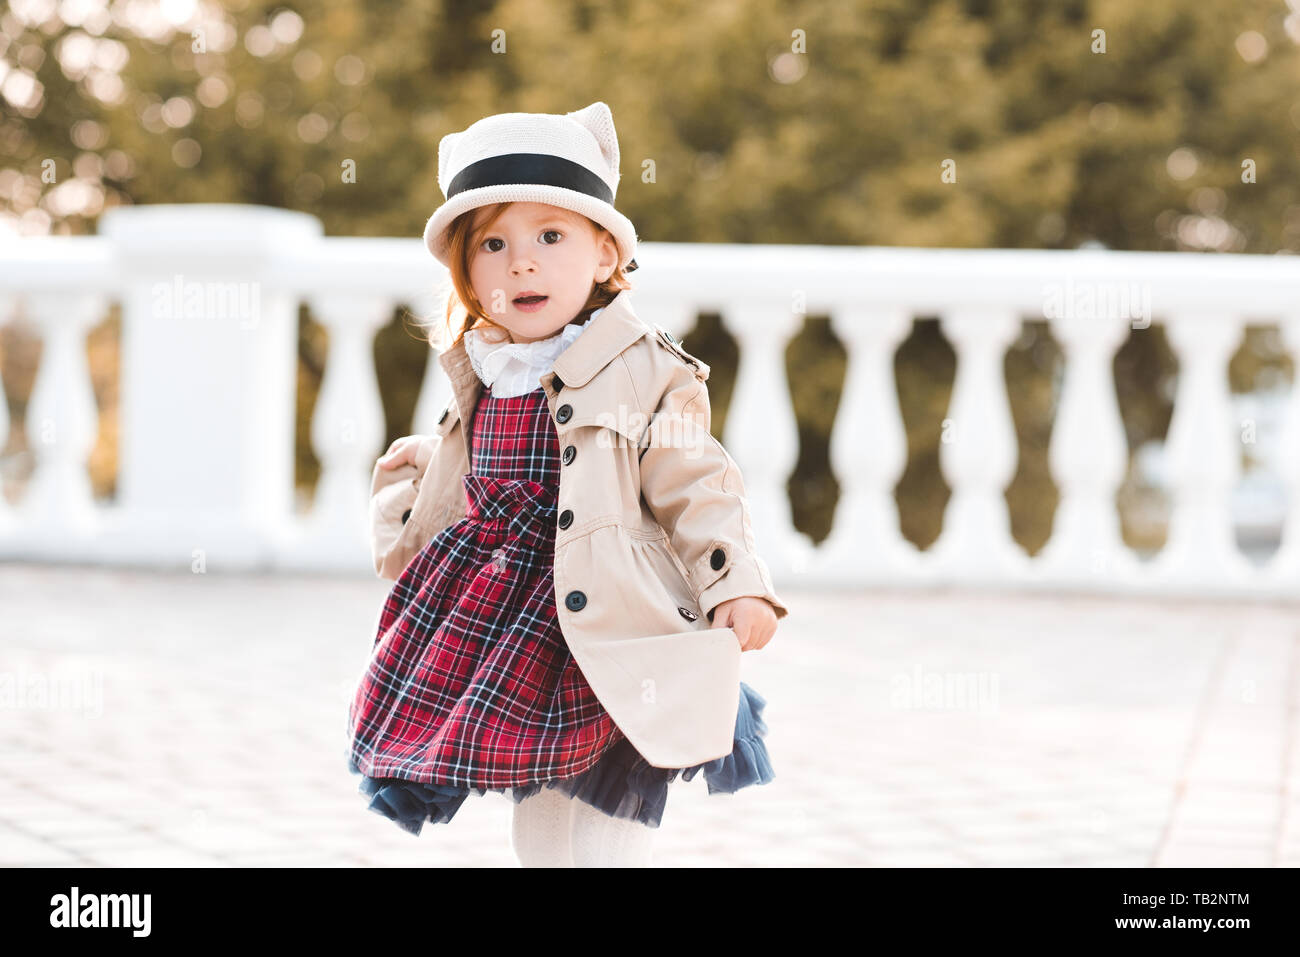 https://c8.alamy.com/comp/TB2NTM/cute-kid-girl-1-2-year-old-wearing-stylish-clothes-over-city-background-looking-at-camera-childhood-TB2NTM.jpg